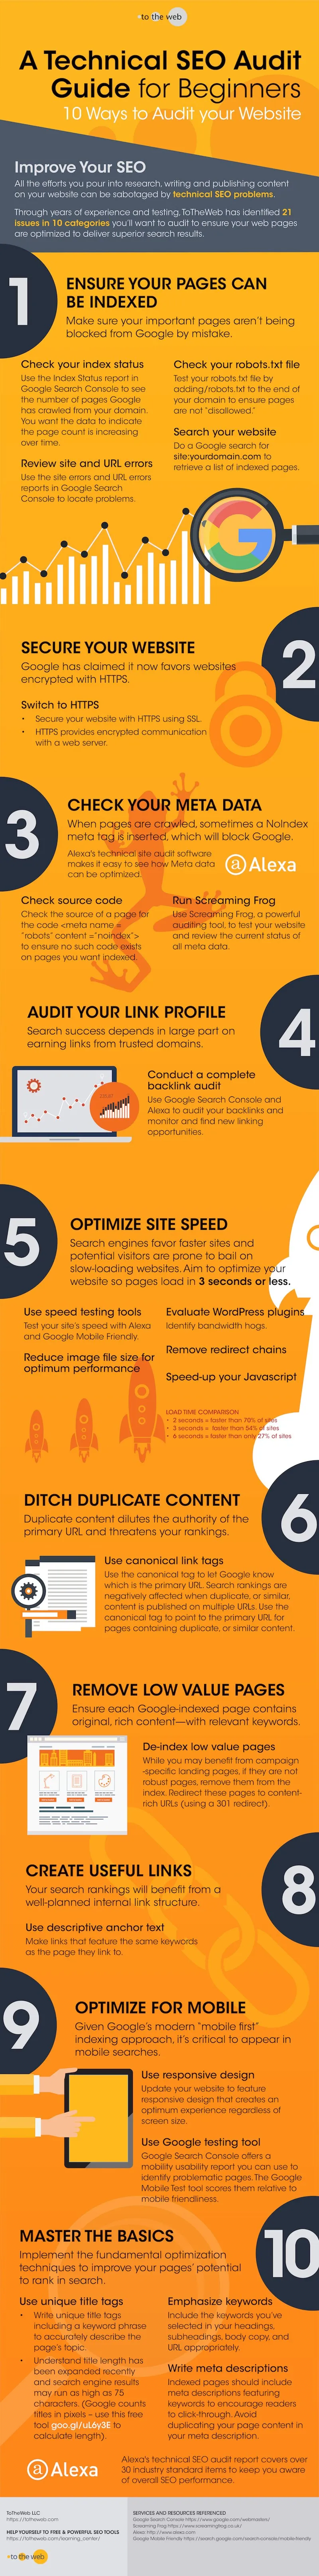 Technical SEO Audit Checklist to Improve Google Search - #Infographic